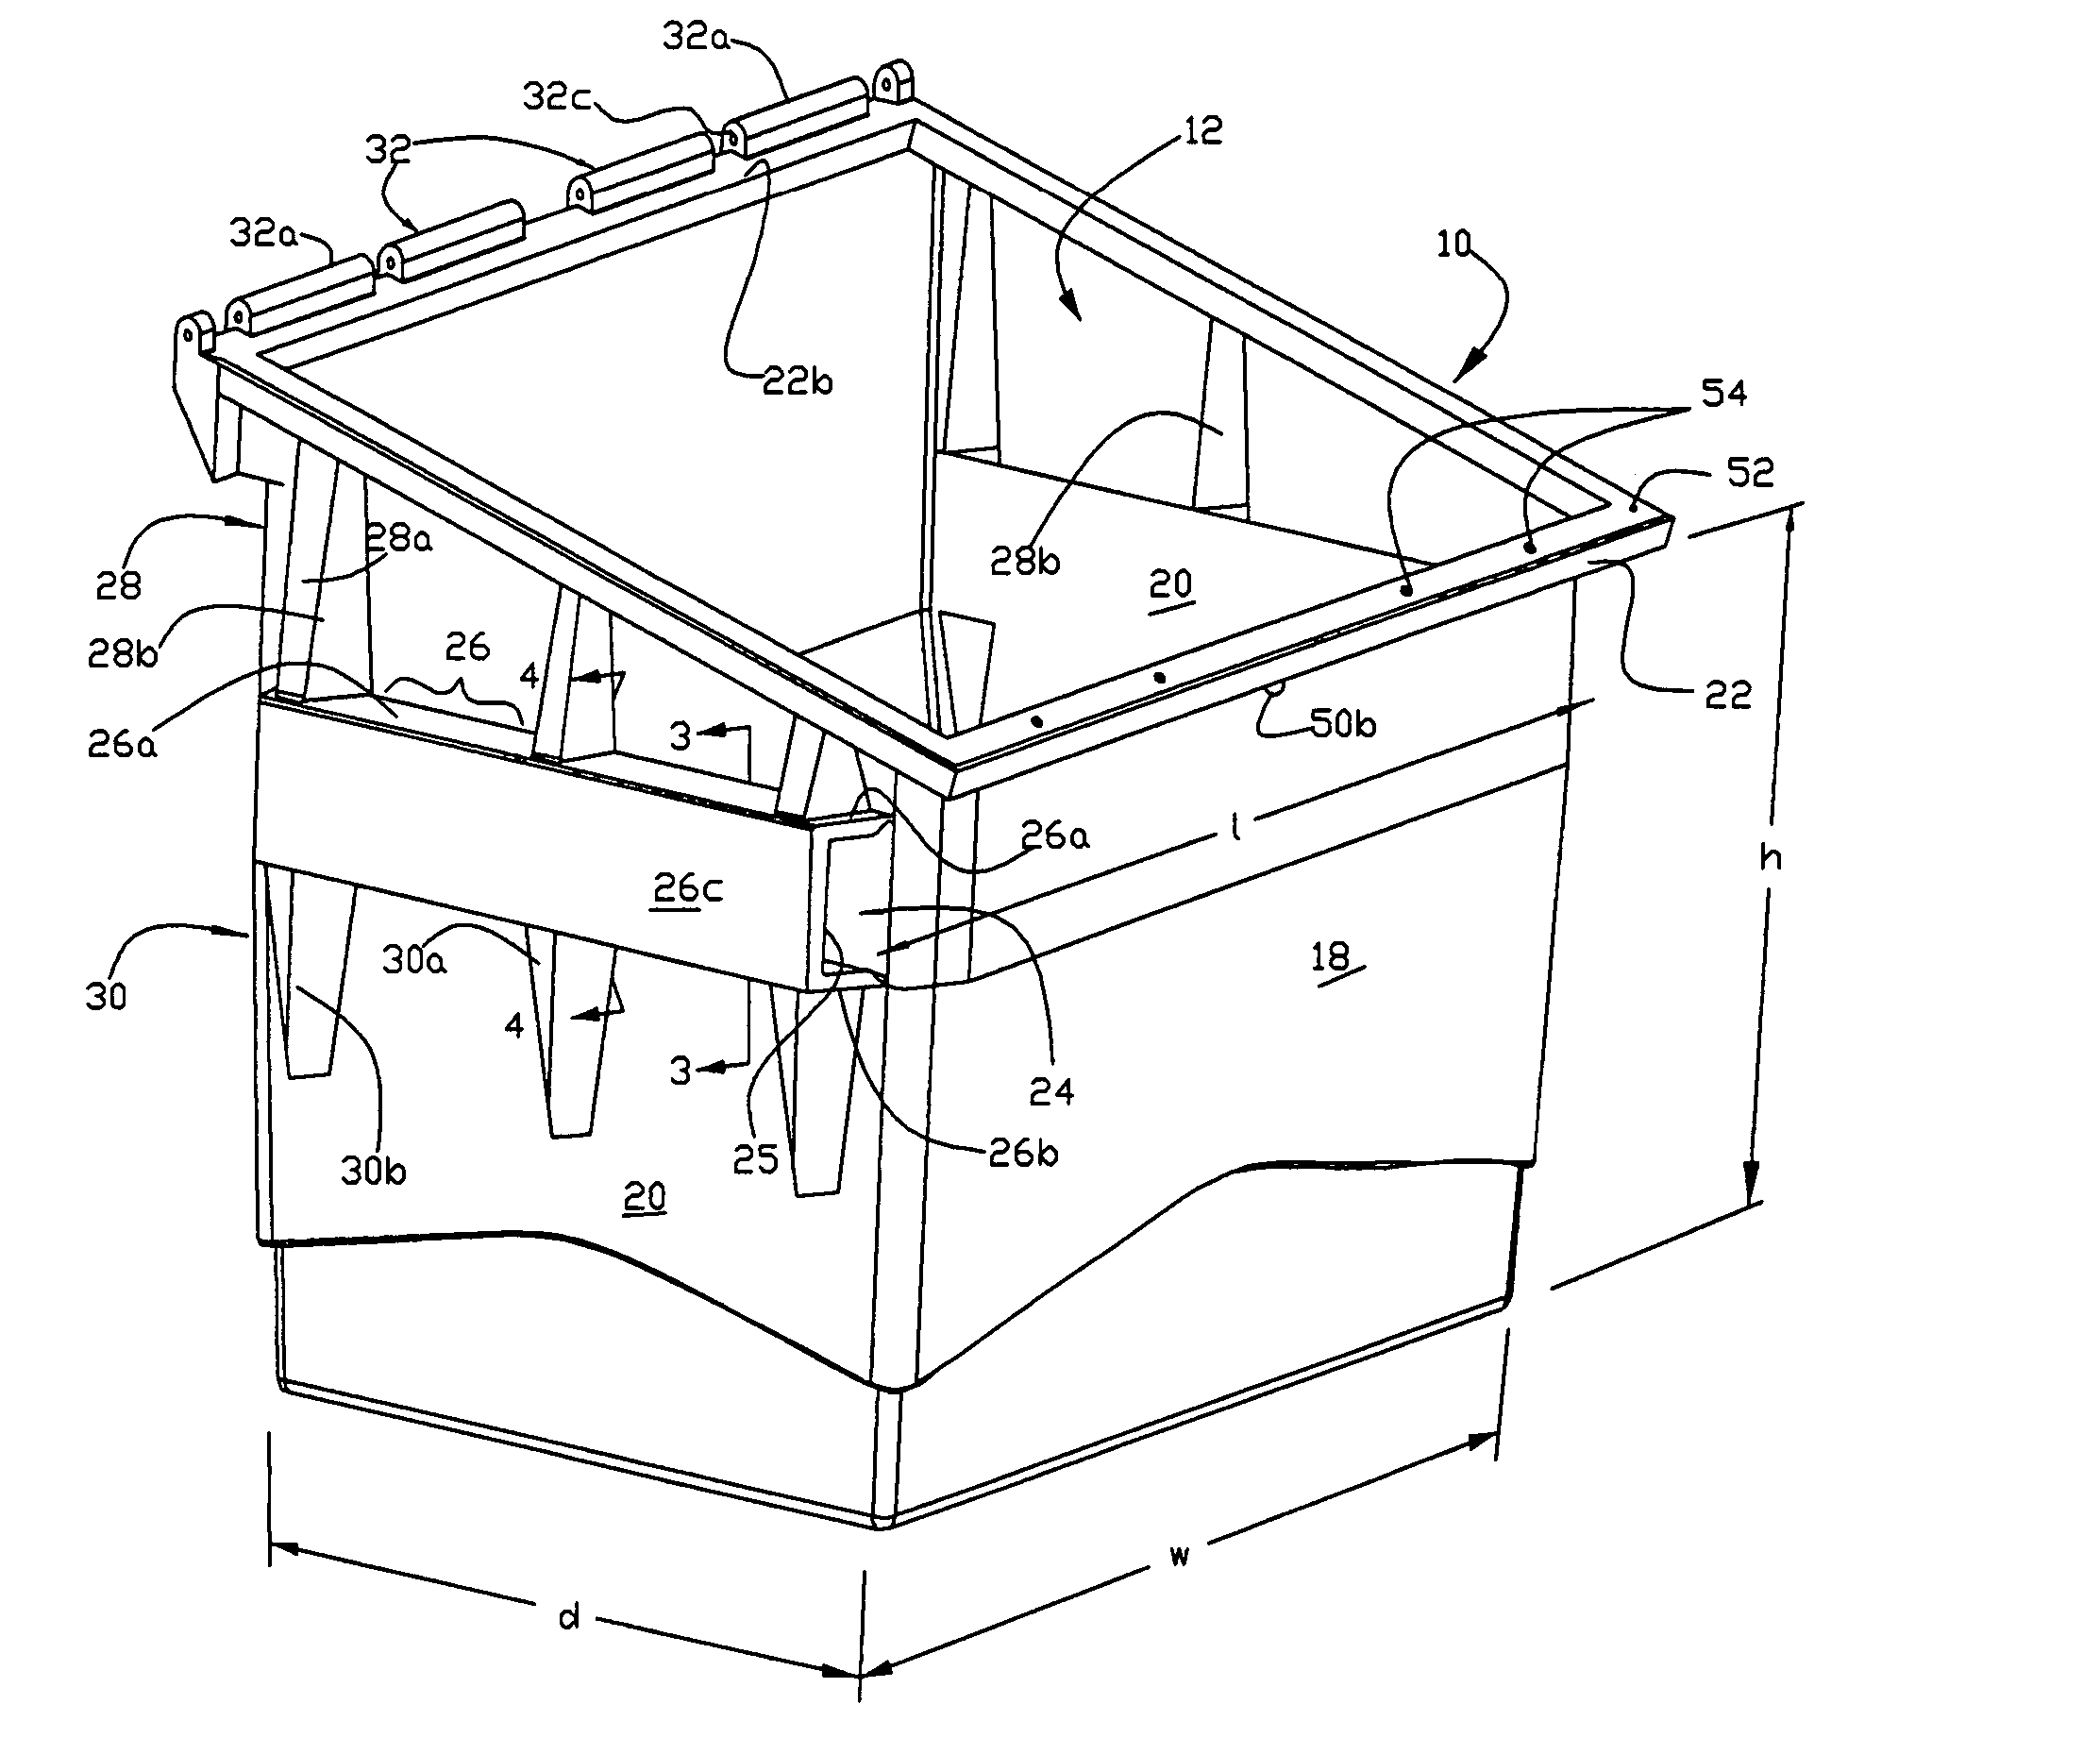 Molded plastic waste container with integral side channels for receiving lifting prongs and method